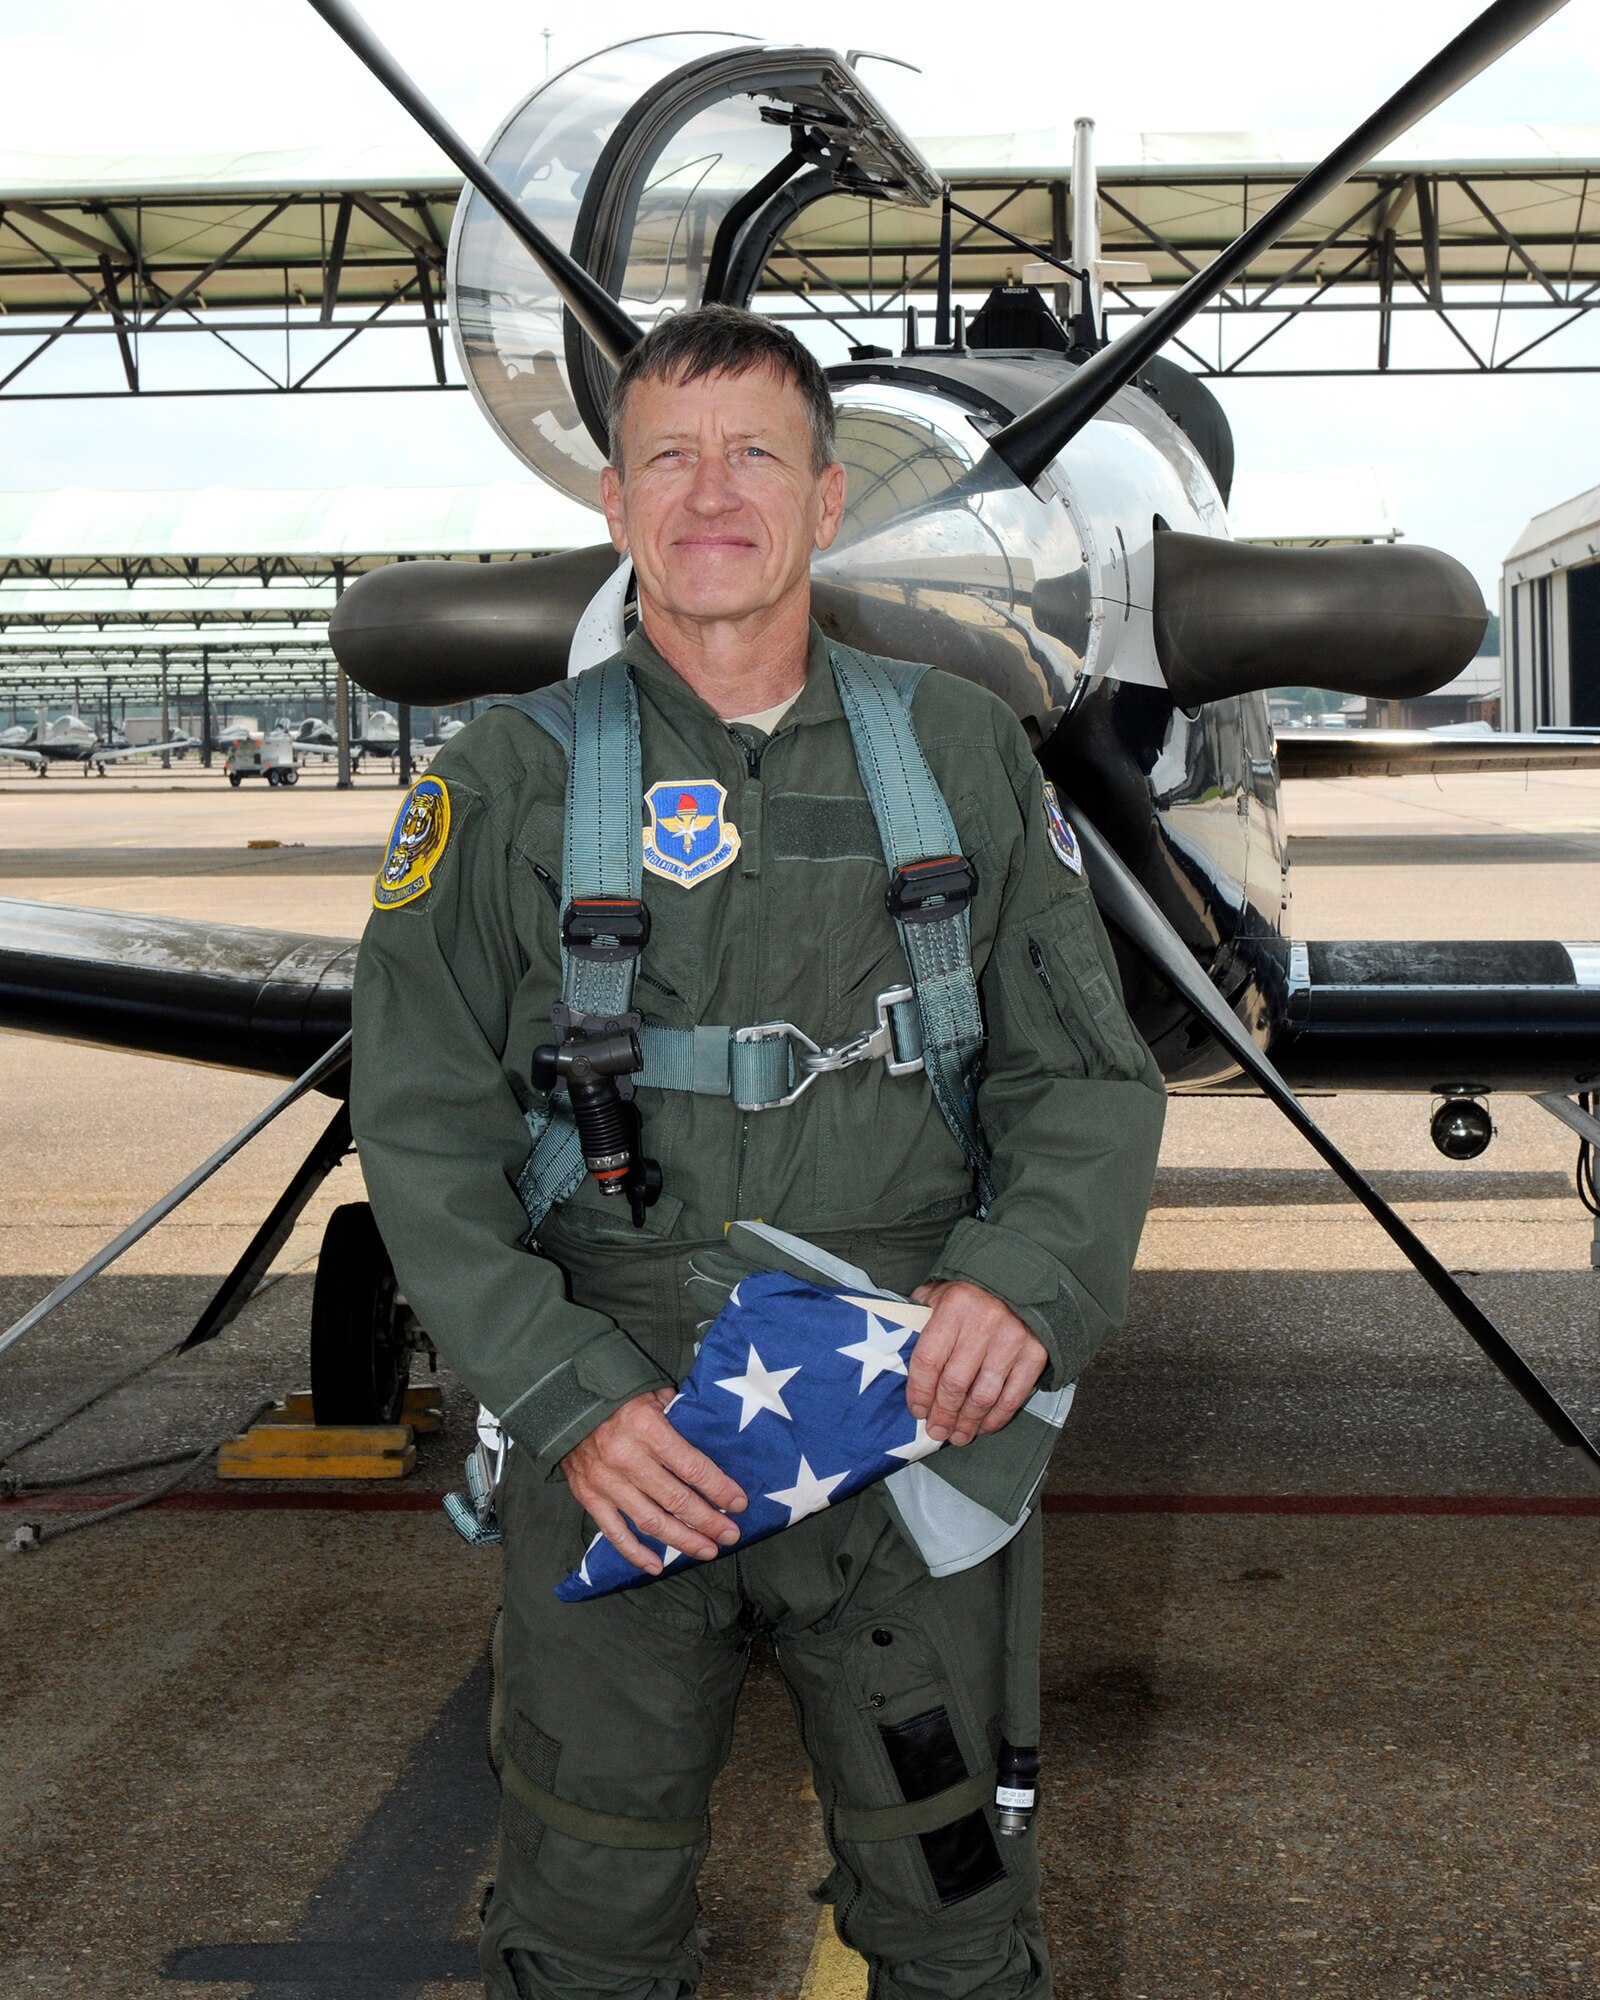 Lt. Col. Douglas Jantzen, 14th Flying Training Wing Chief of aircraft Maintenance, pauses next to a T-6 Texan II after his familiarization flight Sept. 10 on the Columbus Air Force Base flightline. The flight occurred on the 40th anniversary of Jantzen’s enlistment into the United States Air Force, making him the most senior lieutenant colonel in the U.S. Air Force. (U.S. Air Force photo/Melissa Dublin)